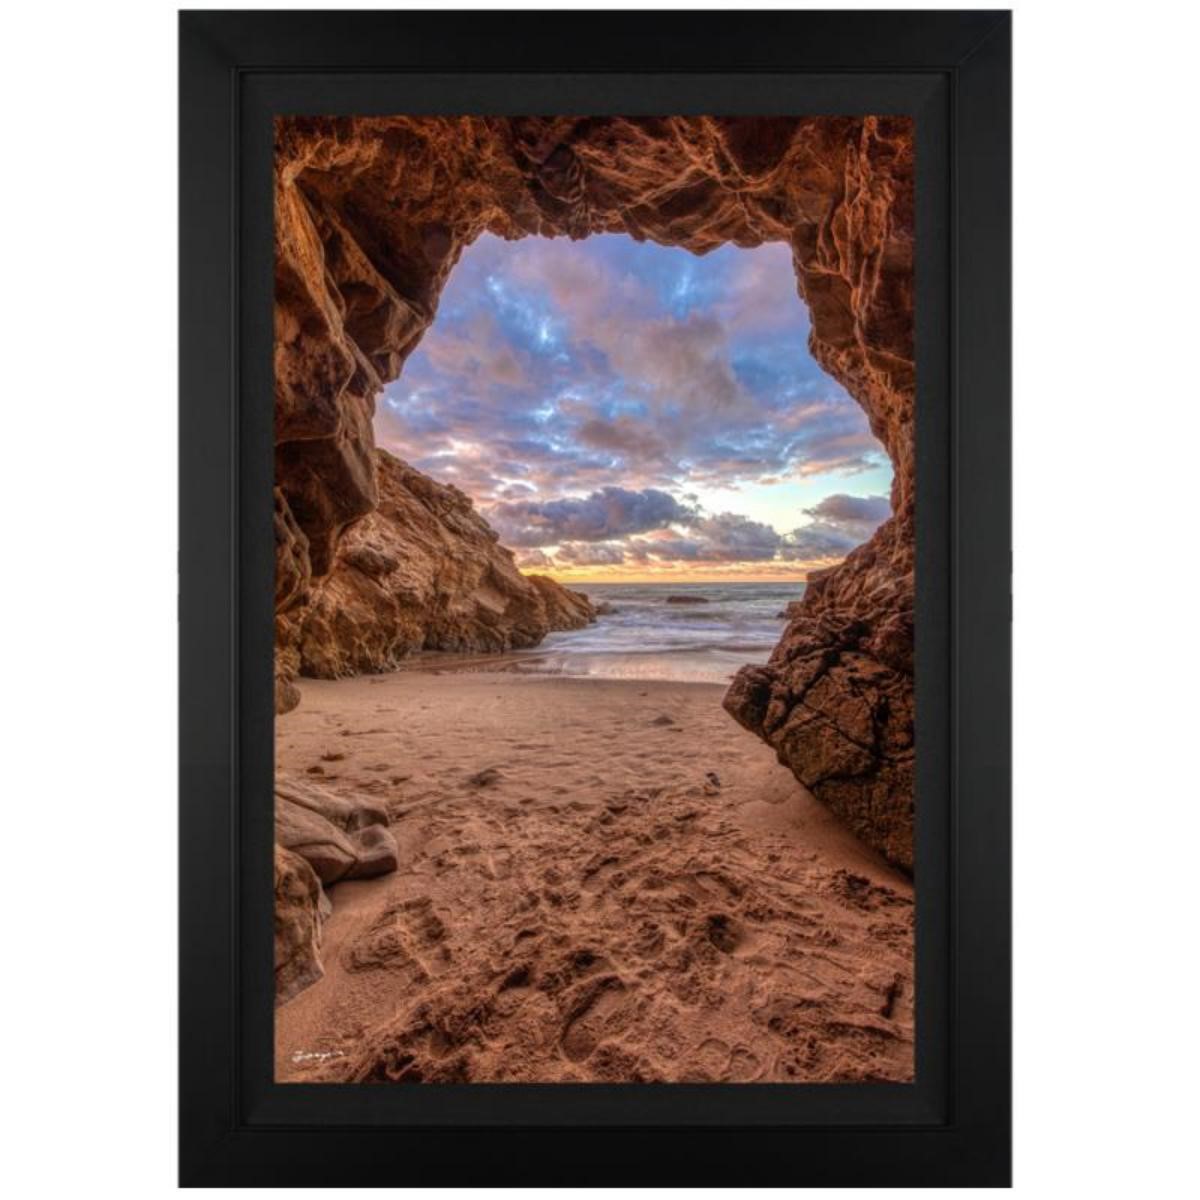 Jongas, "Wondercave" Framed Limited Edition on Can